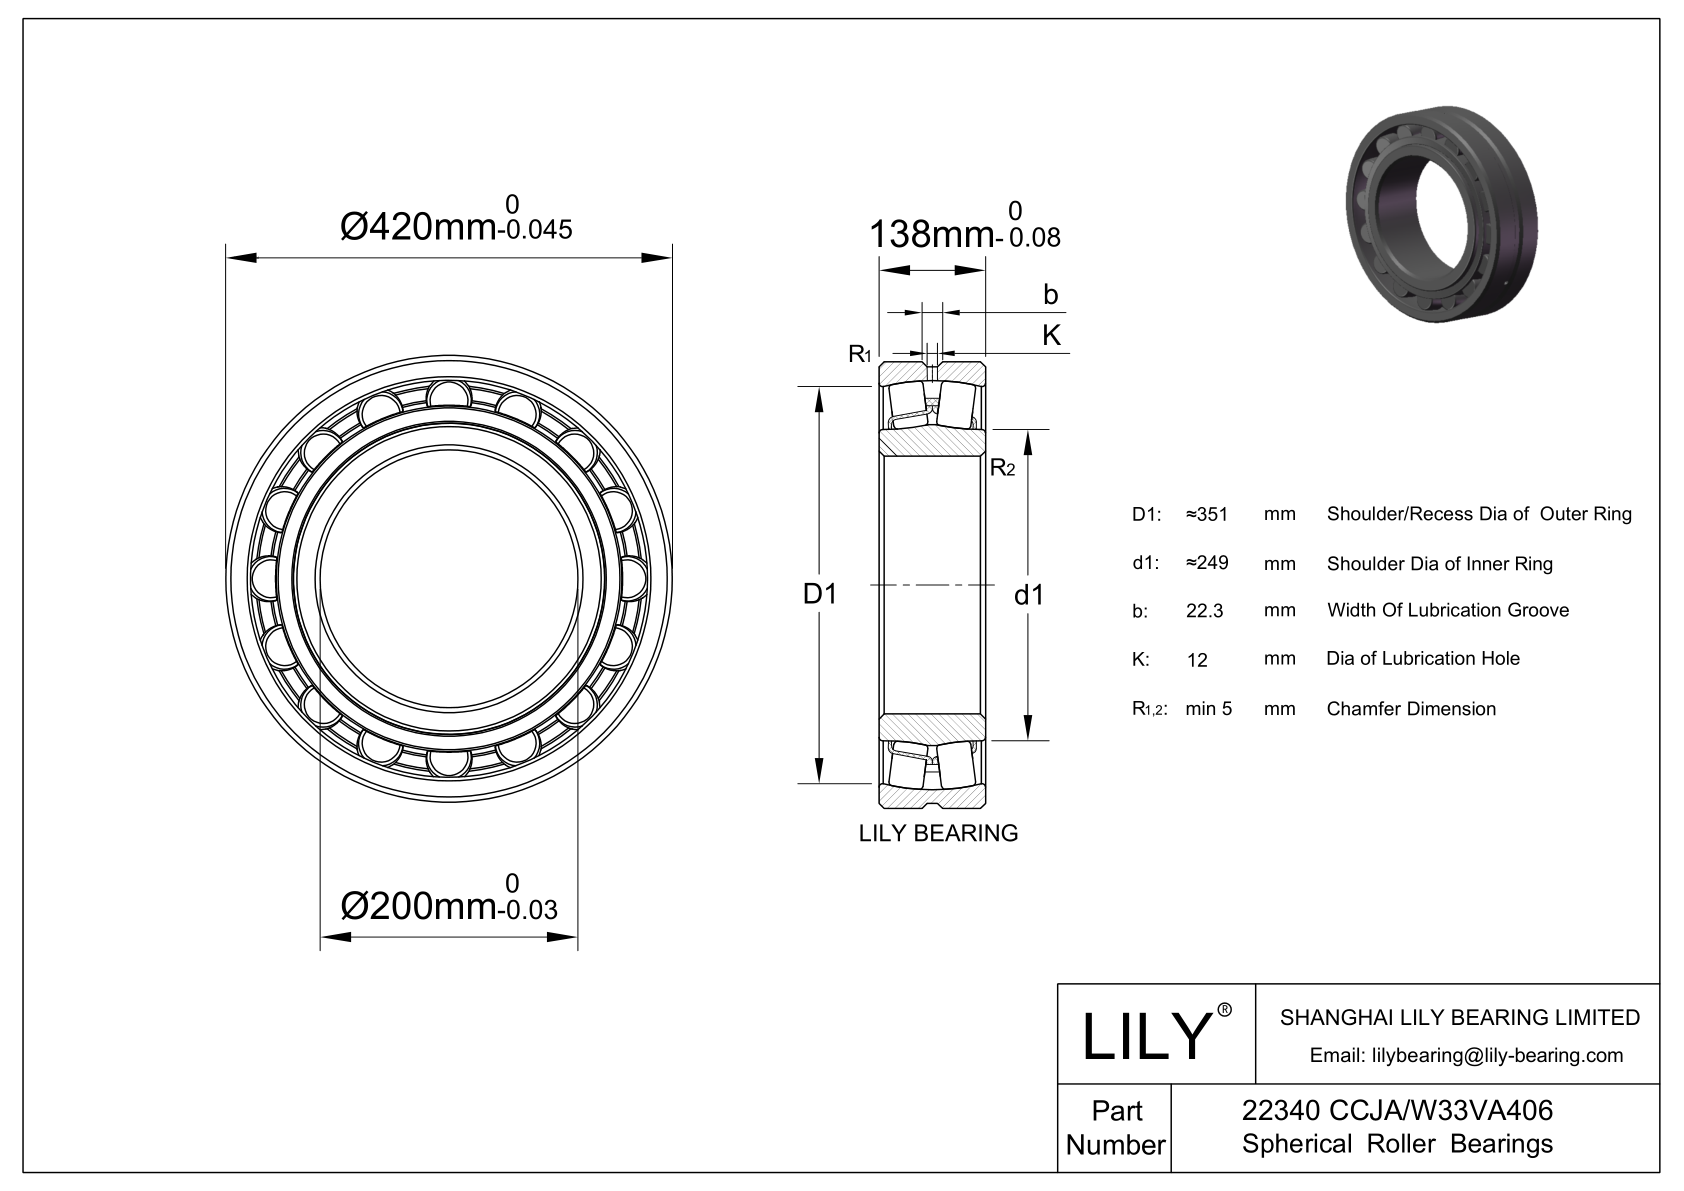 22340 CCJA/W33VA406 Double Row Spherical Roller Bearing cad drawing